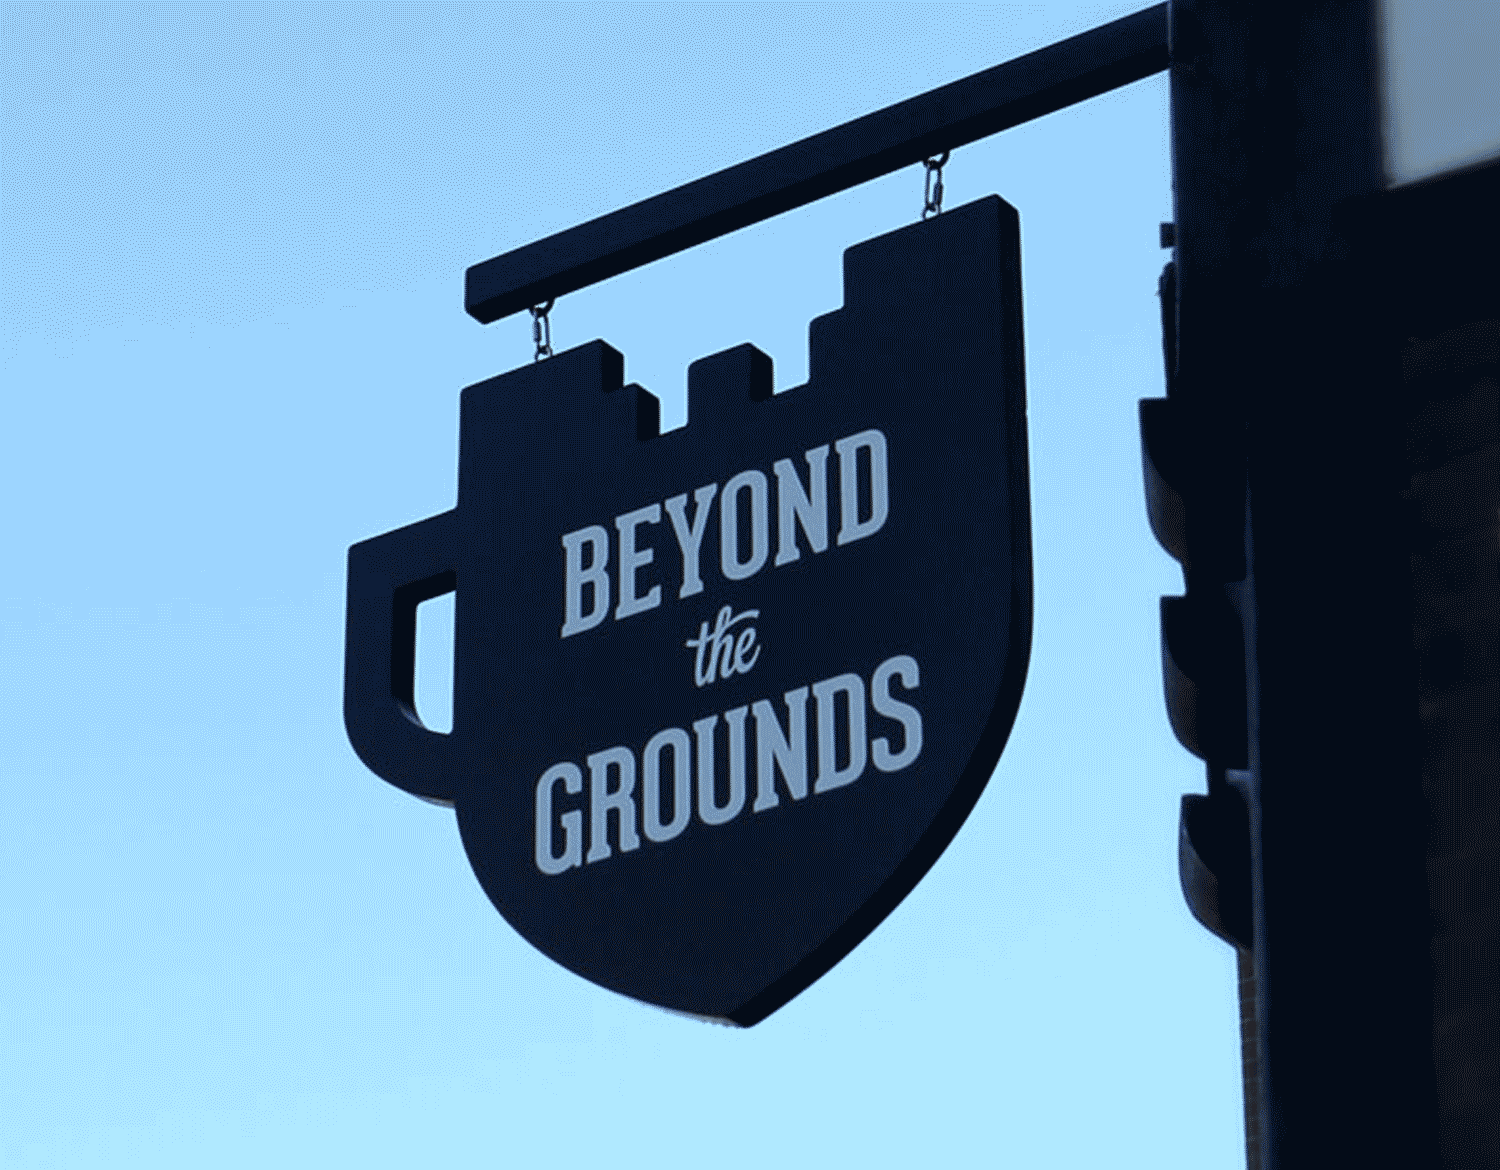 Beyond the Grounds - Shining out of the shadows